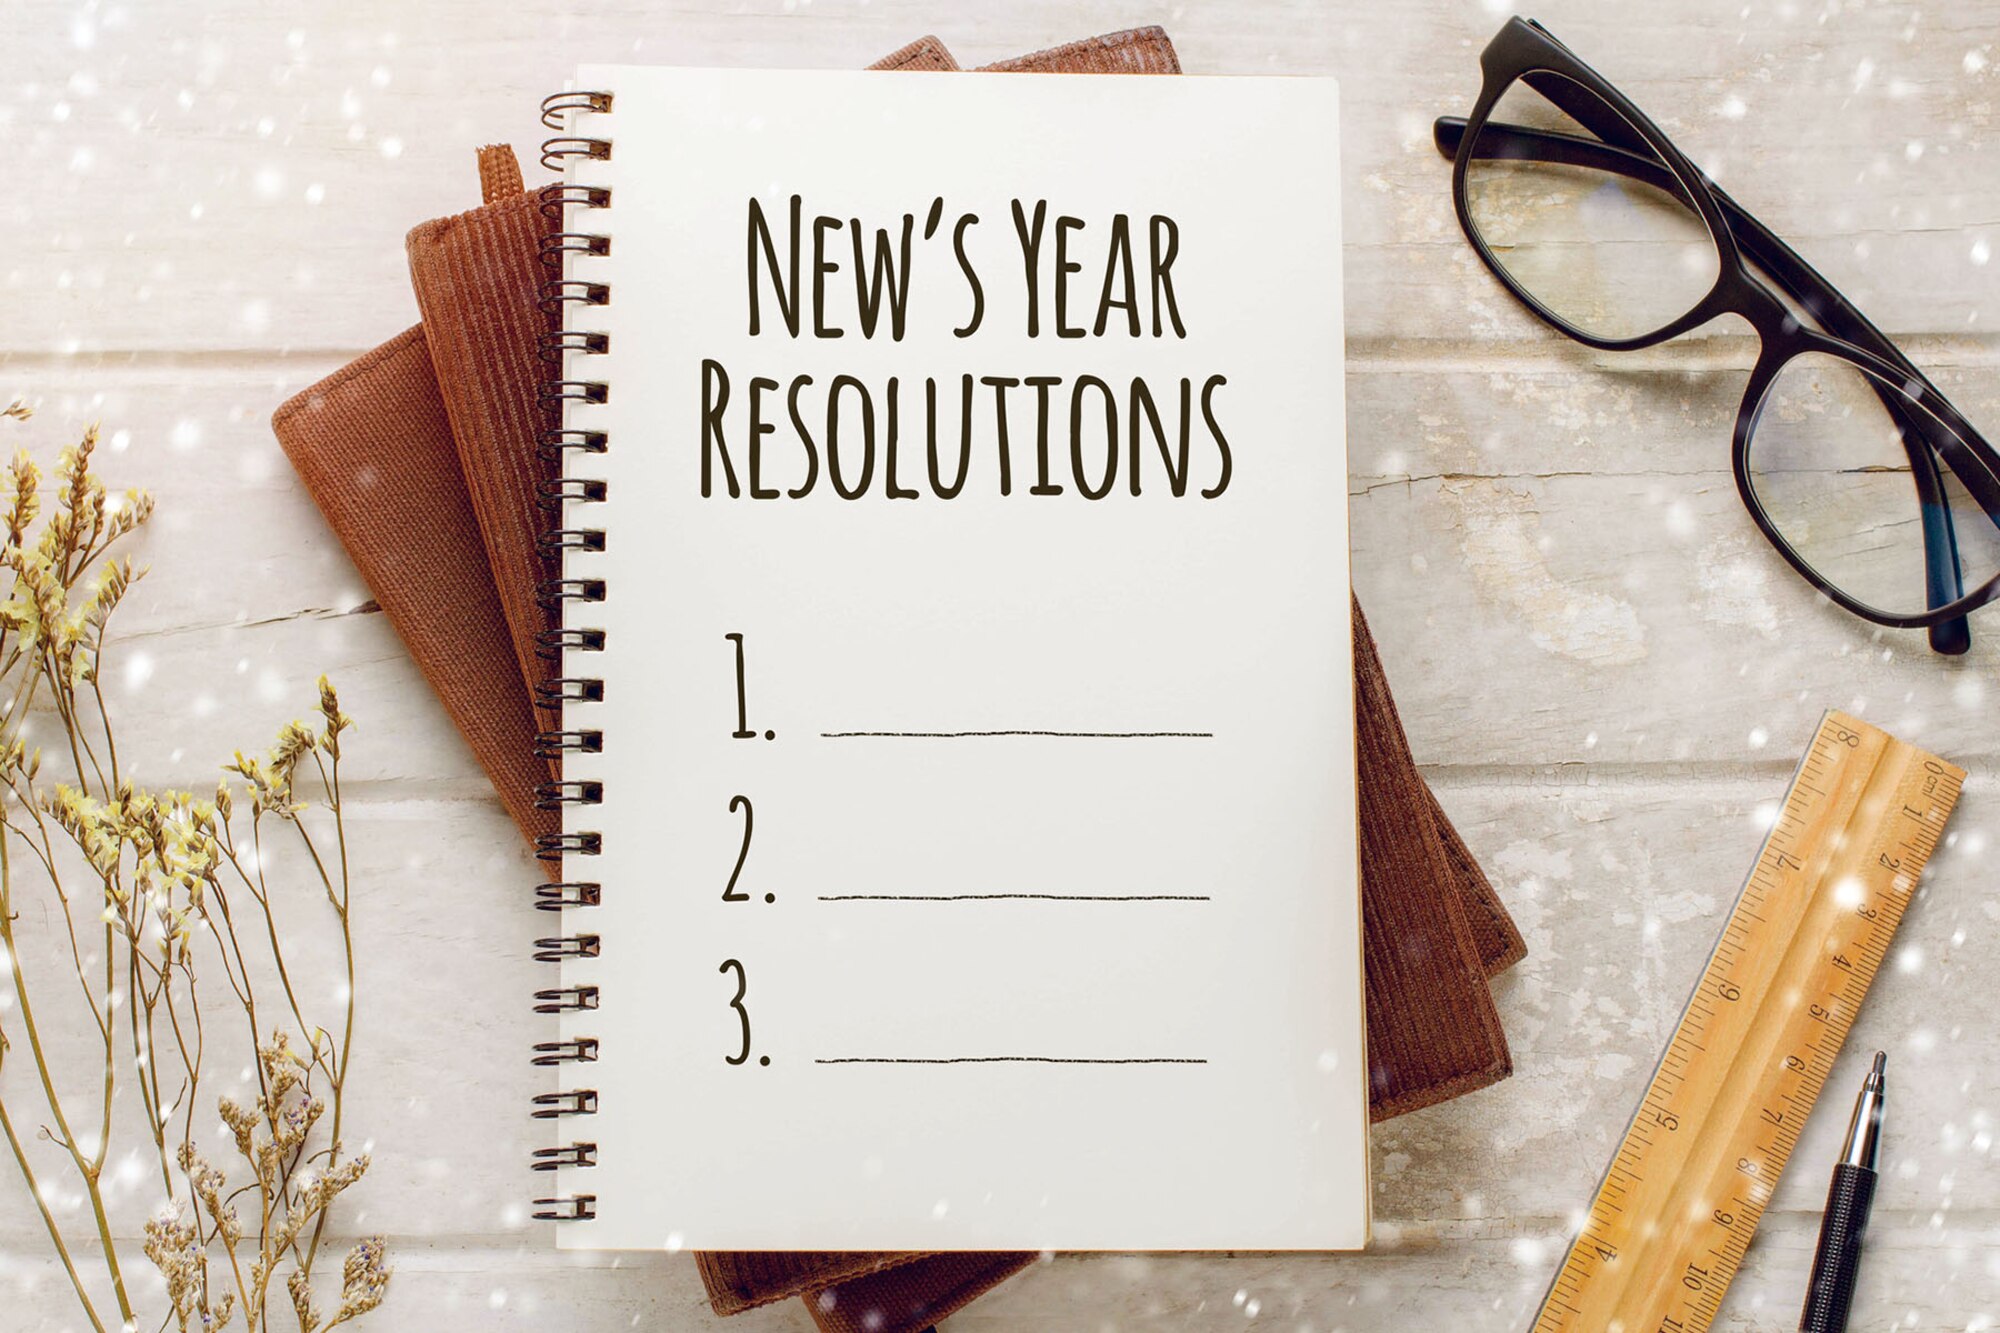 Notebook with New Year Resolutions massage, glasses and working ornament on white wooden table background.